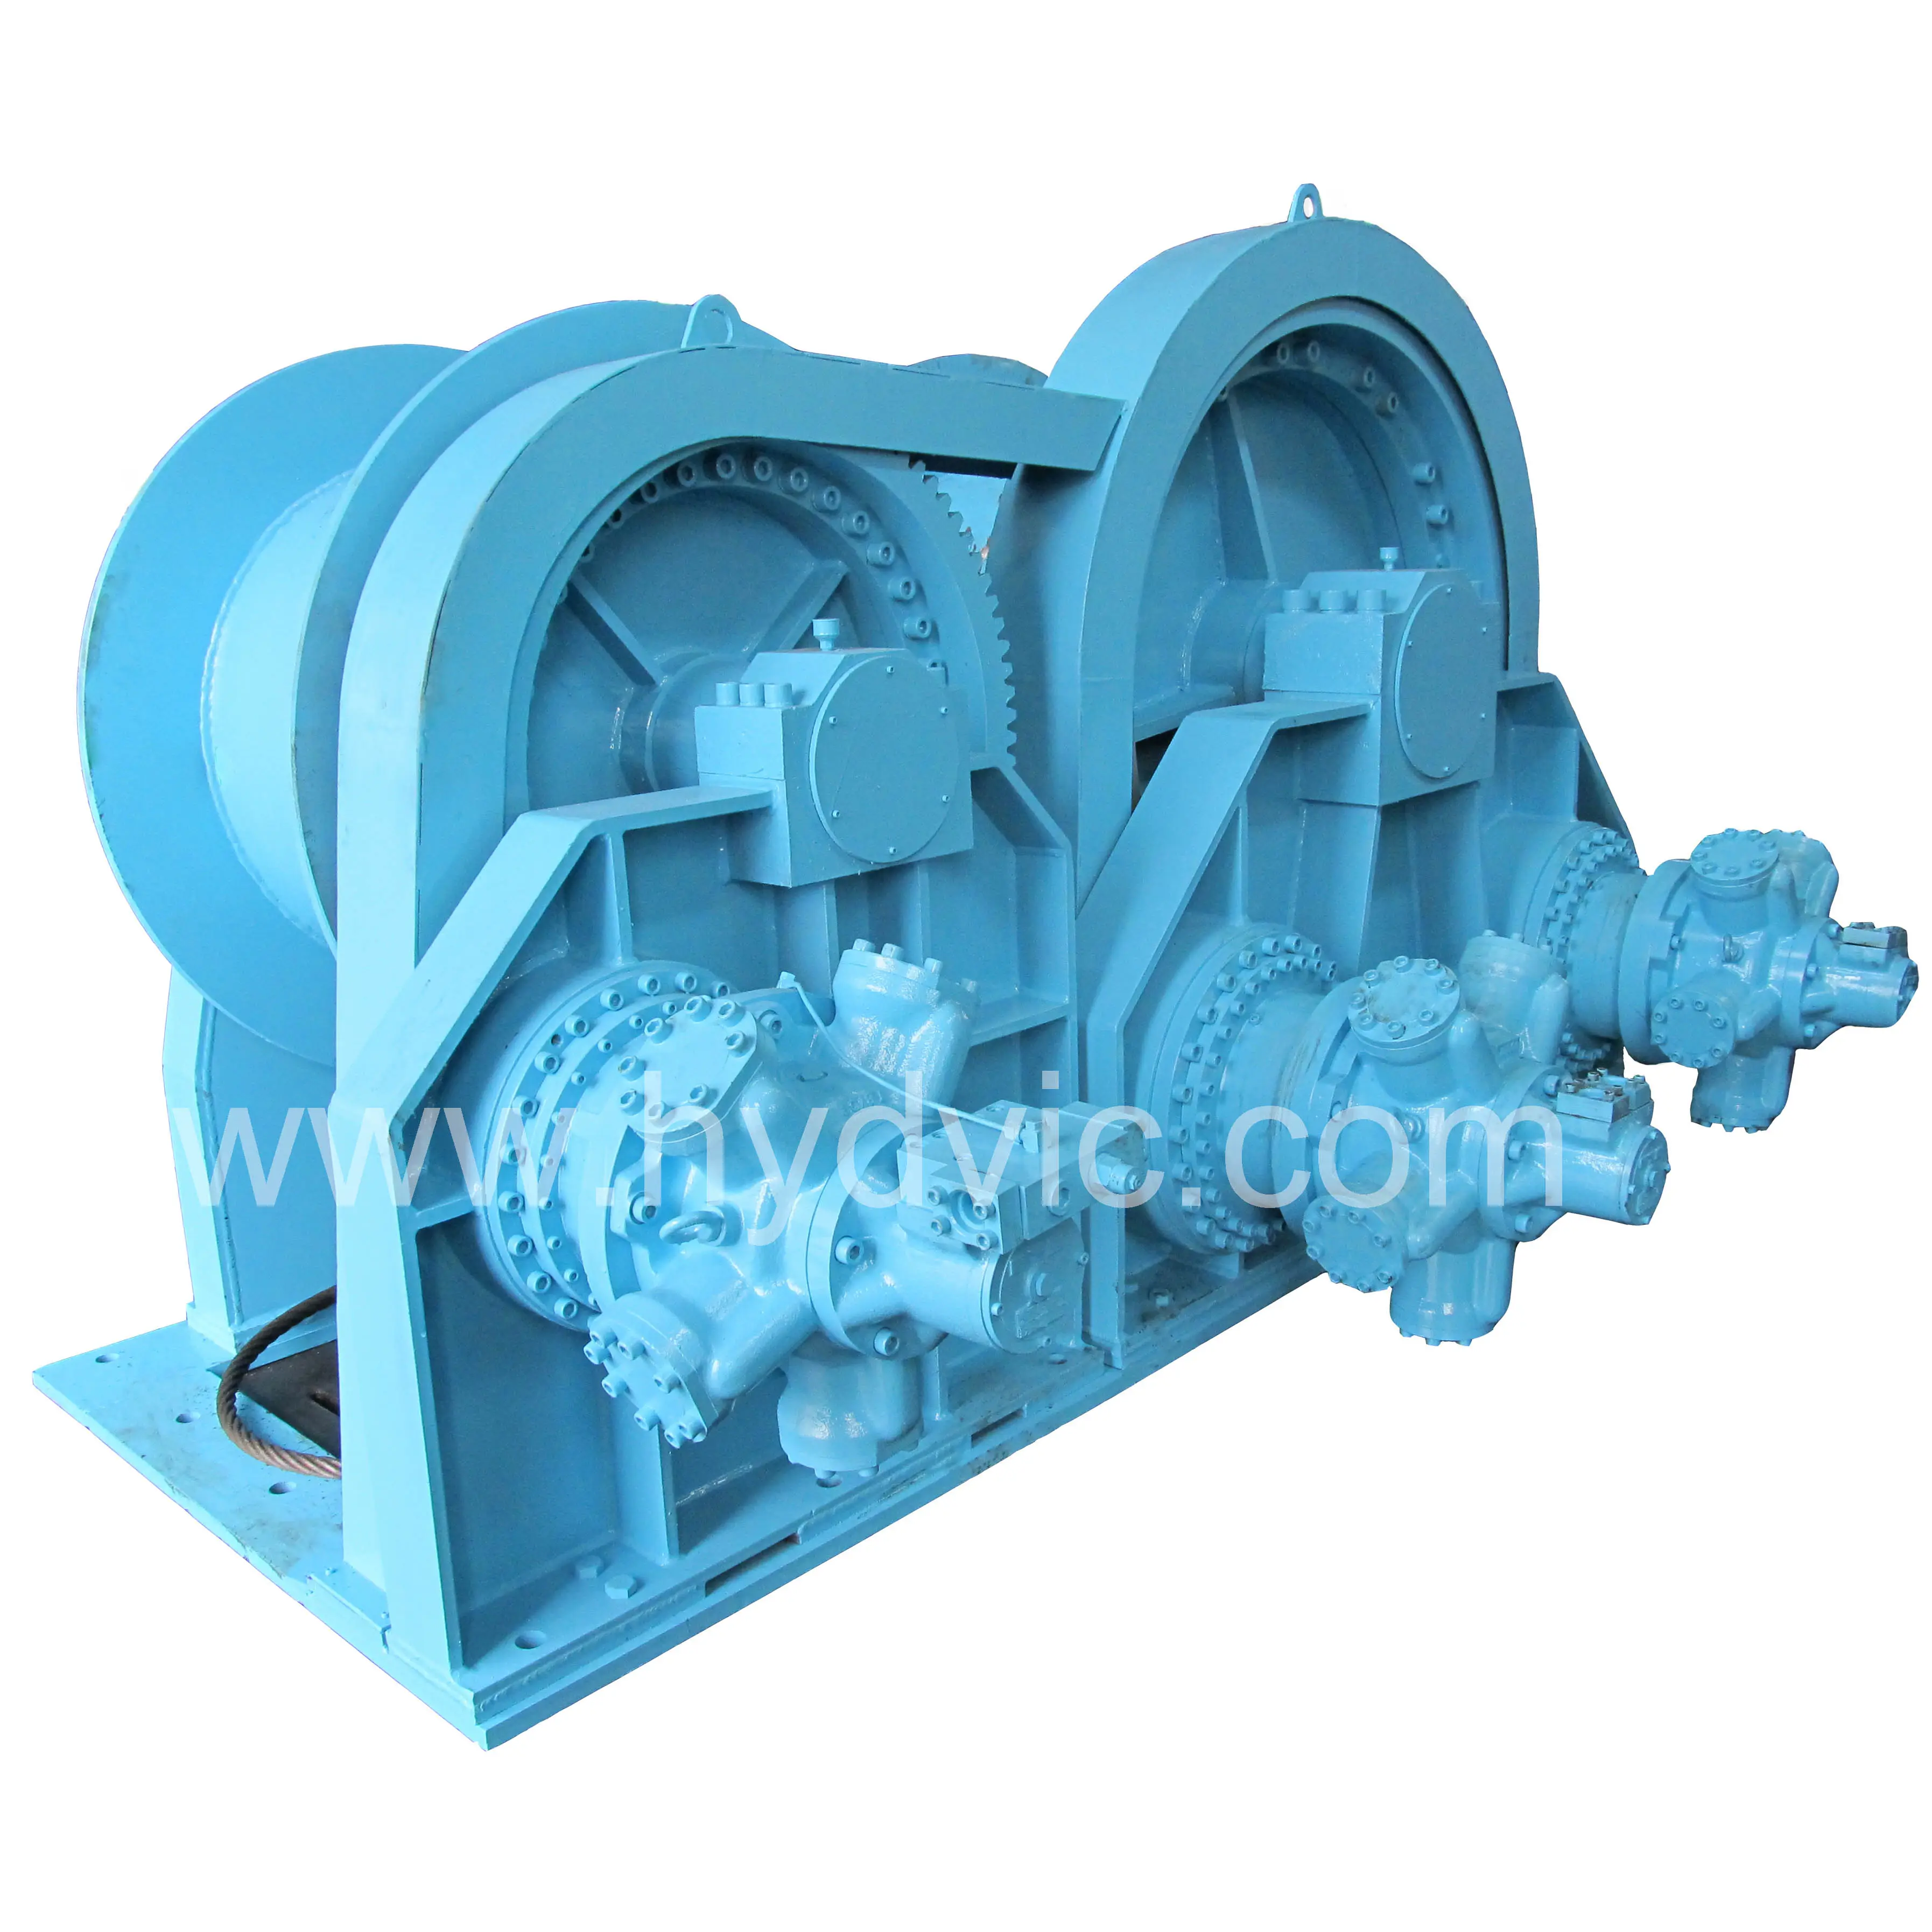 CCS, ABS, DNV, BV,GL, etc, Vertical Horizontal Shipyard Anchor Winches Parts and Hydraulic Electric Marine Mooring Winch